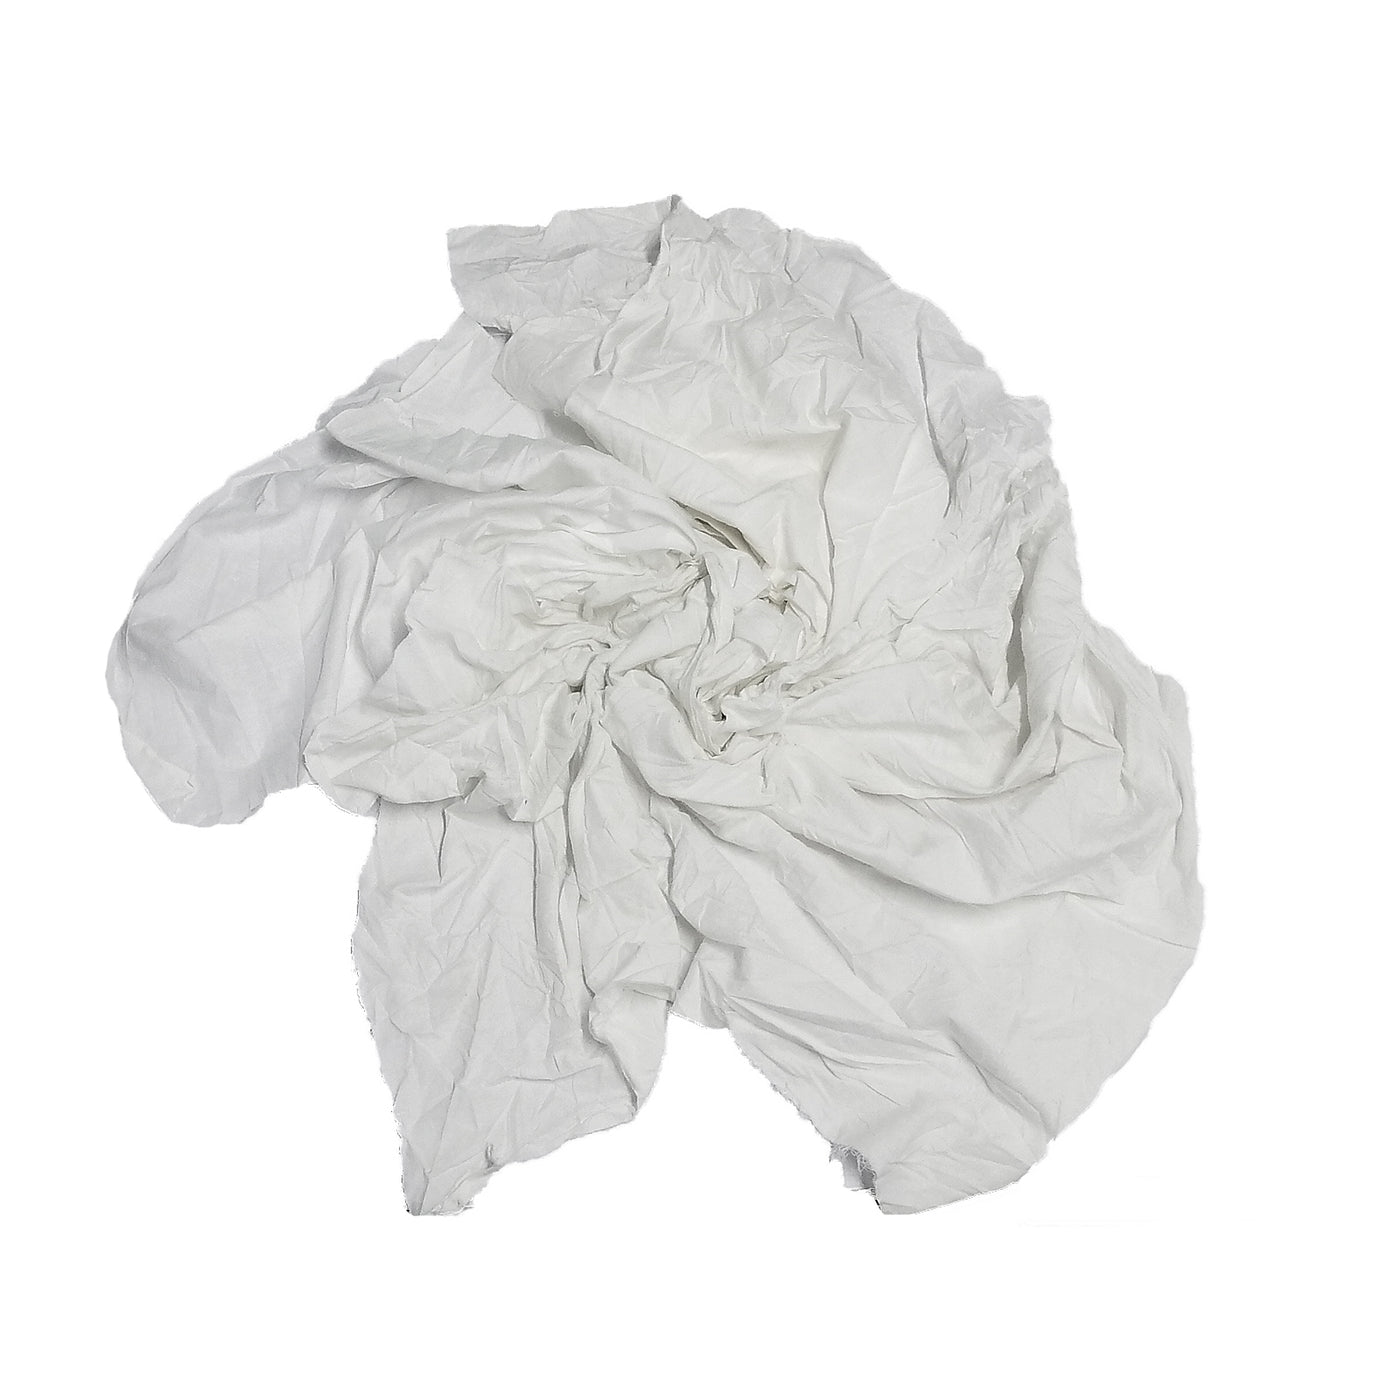 White Knit T-Shirt 100% Cotton Cleaning Rags 50 lbs. Box